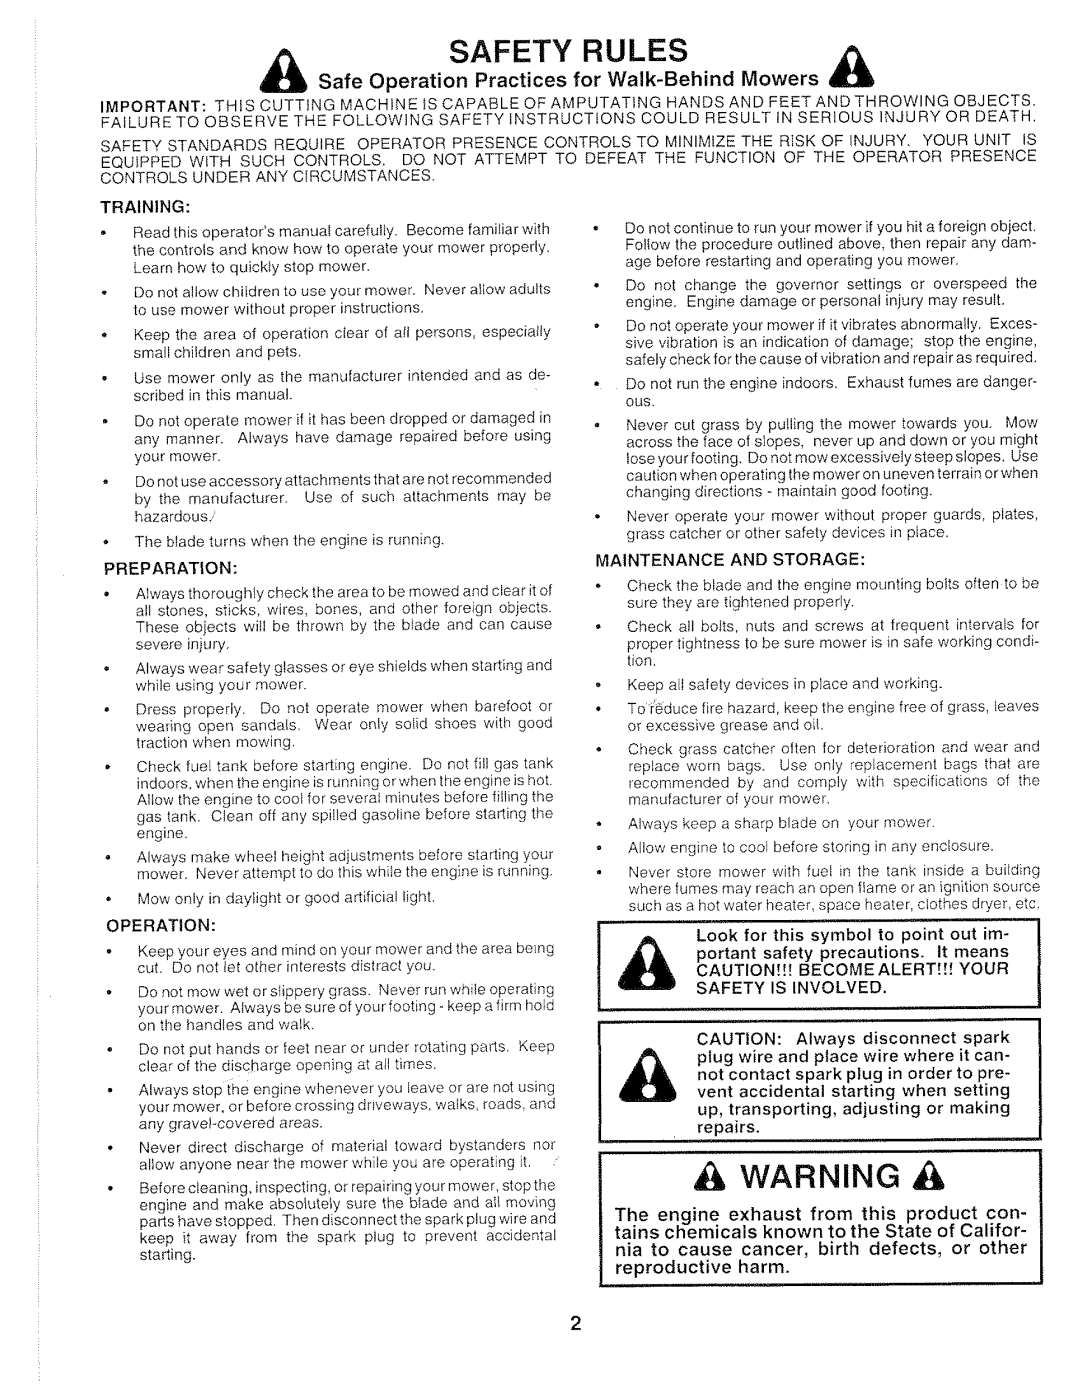 Sears 917.372851 owner manual Safety Rules, Safe Operation Practices for Walk-BehindMowers, Preparation 